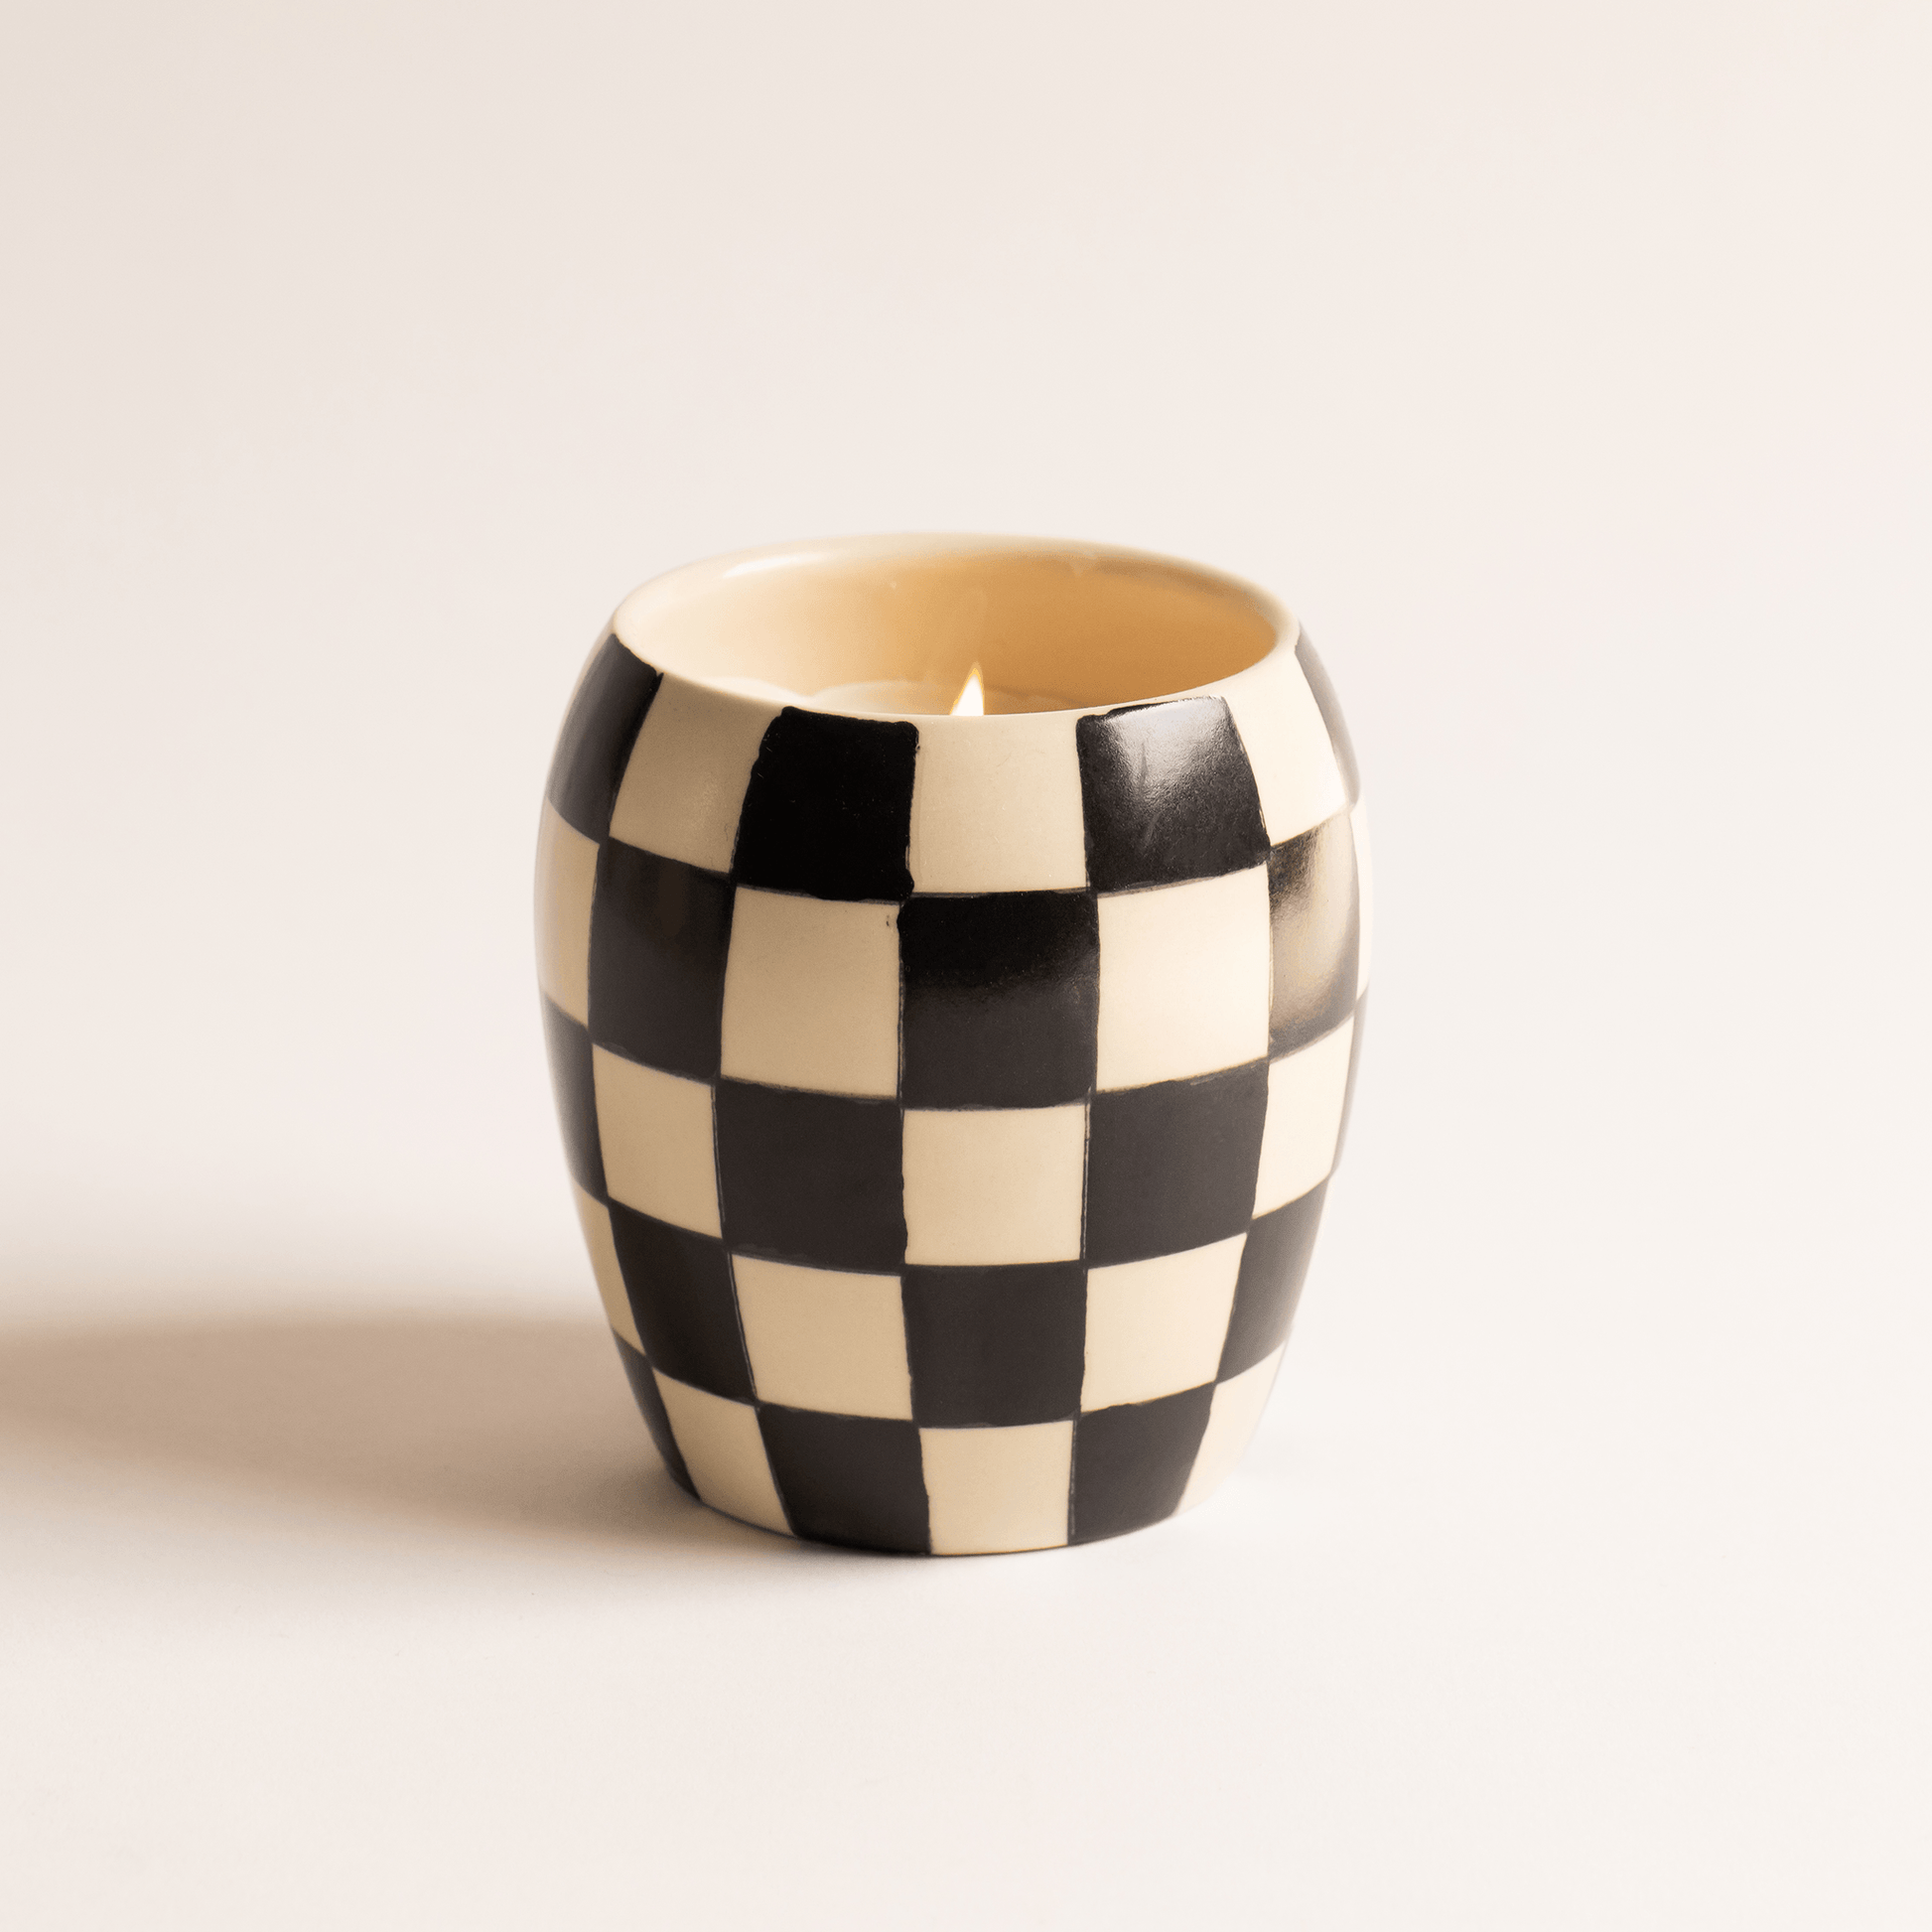 11 oz ceramic vessel with rounded cylindrical shape and a black/white checker design; one cotton wick